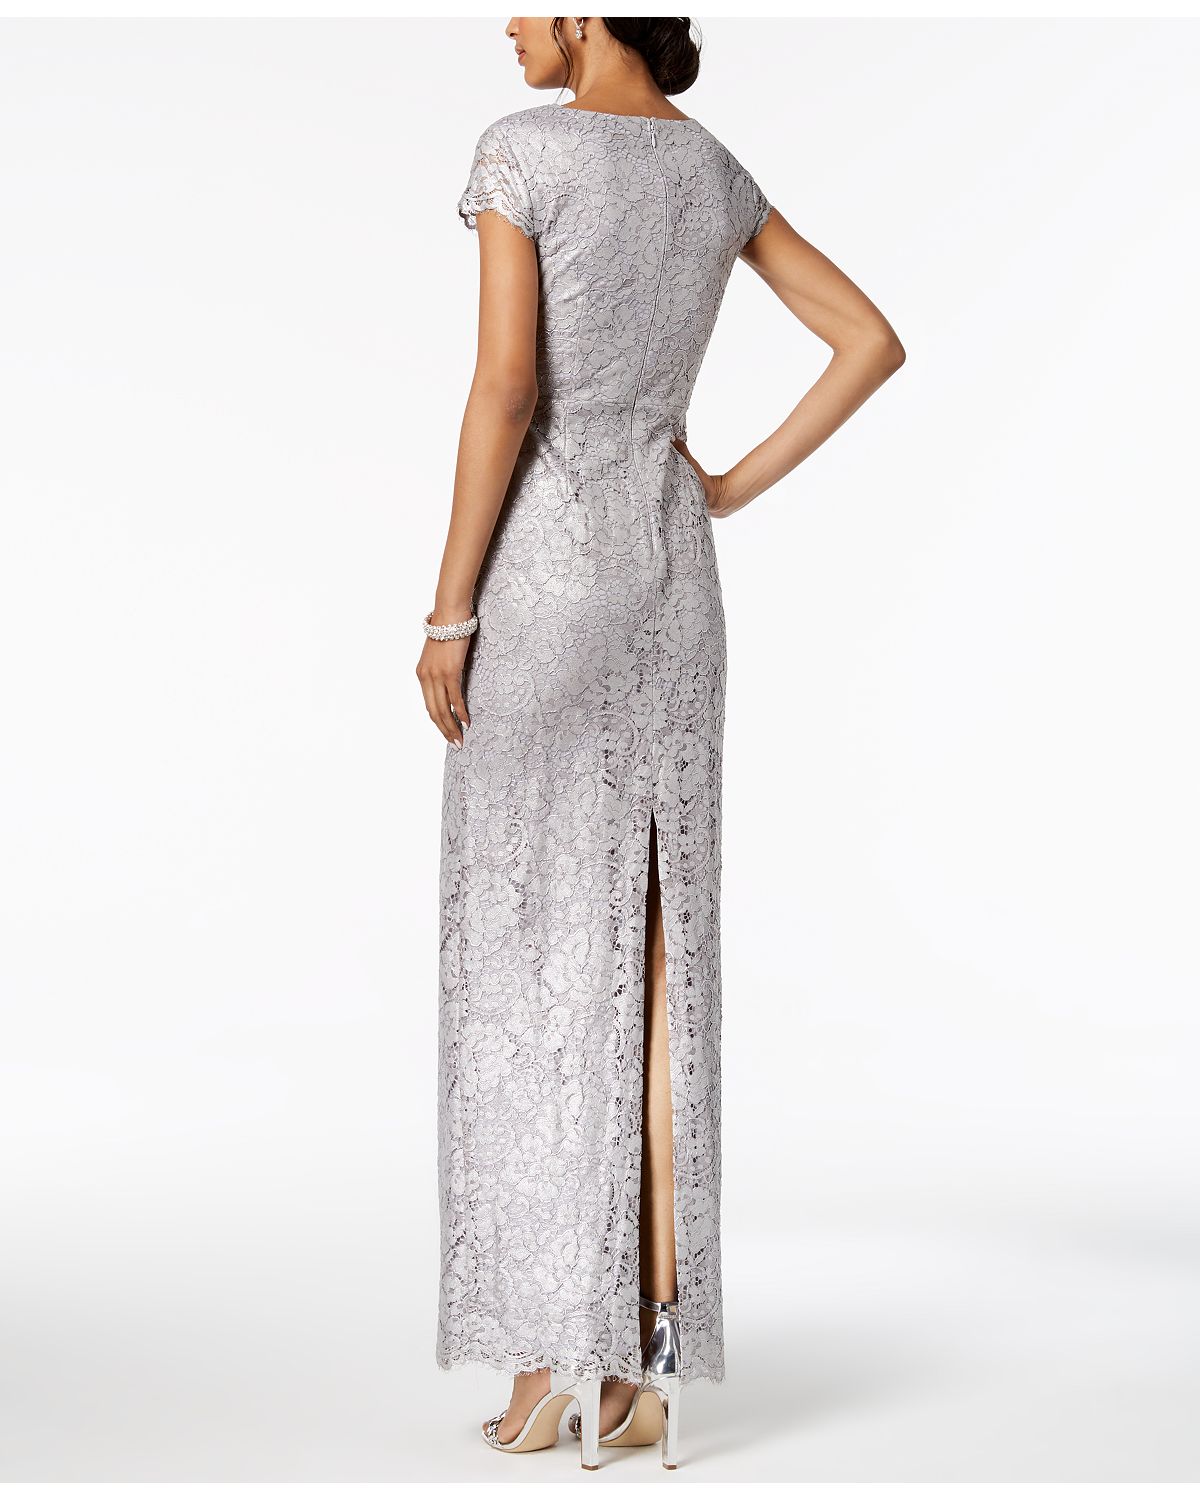 Adrianna Papell Womens Metallic Lace Gown